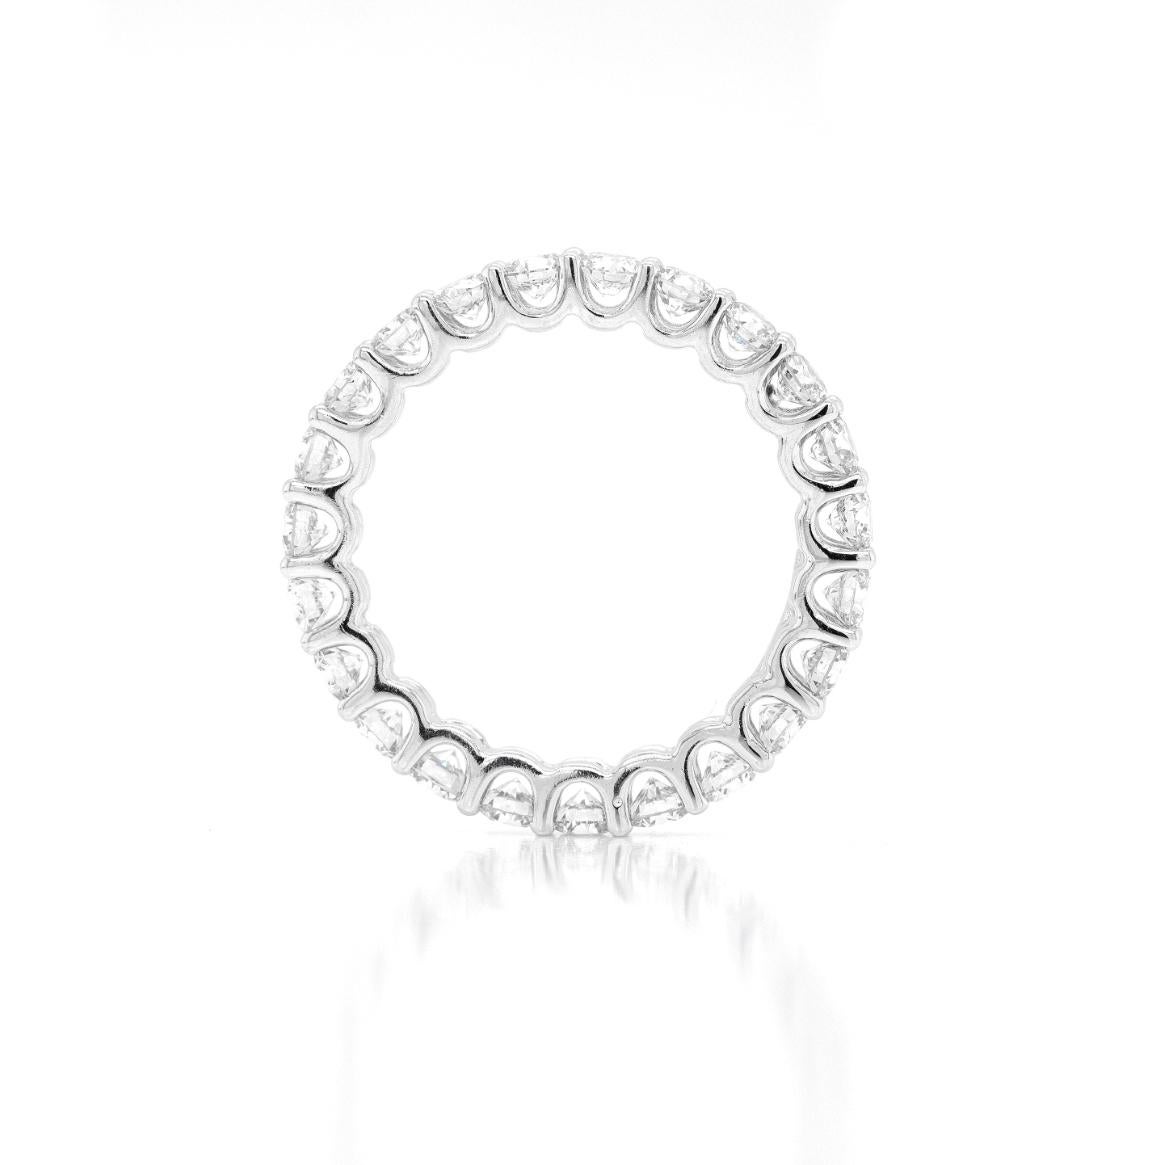 This exquisite full eternity ring is beautifully claw set with 23 fine quality round brilliant cut diamonds, weighing 2.06 carats combined, all mounted in 18 carat white gold open back settings. Stamped D2068, K18. UK finger size 'L'.